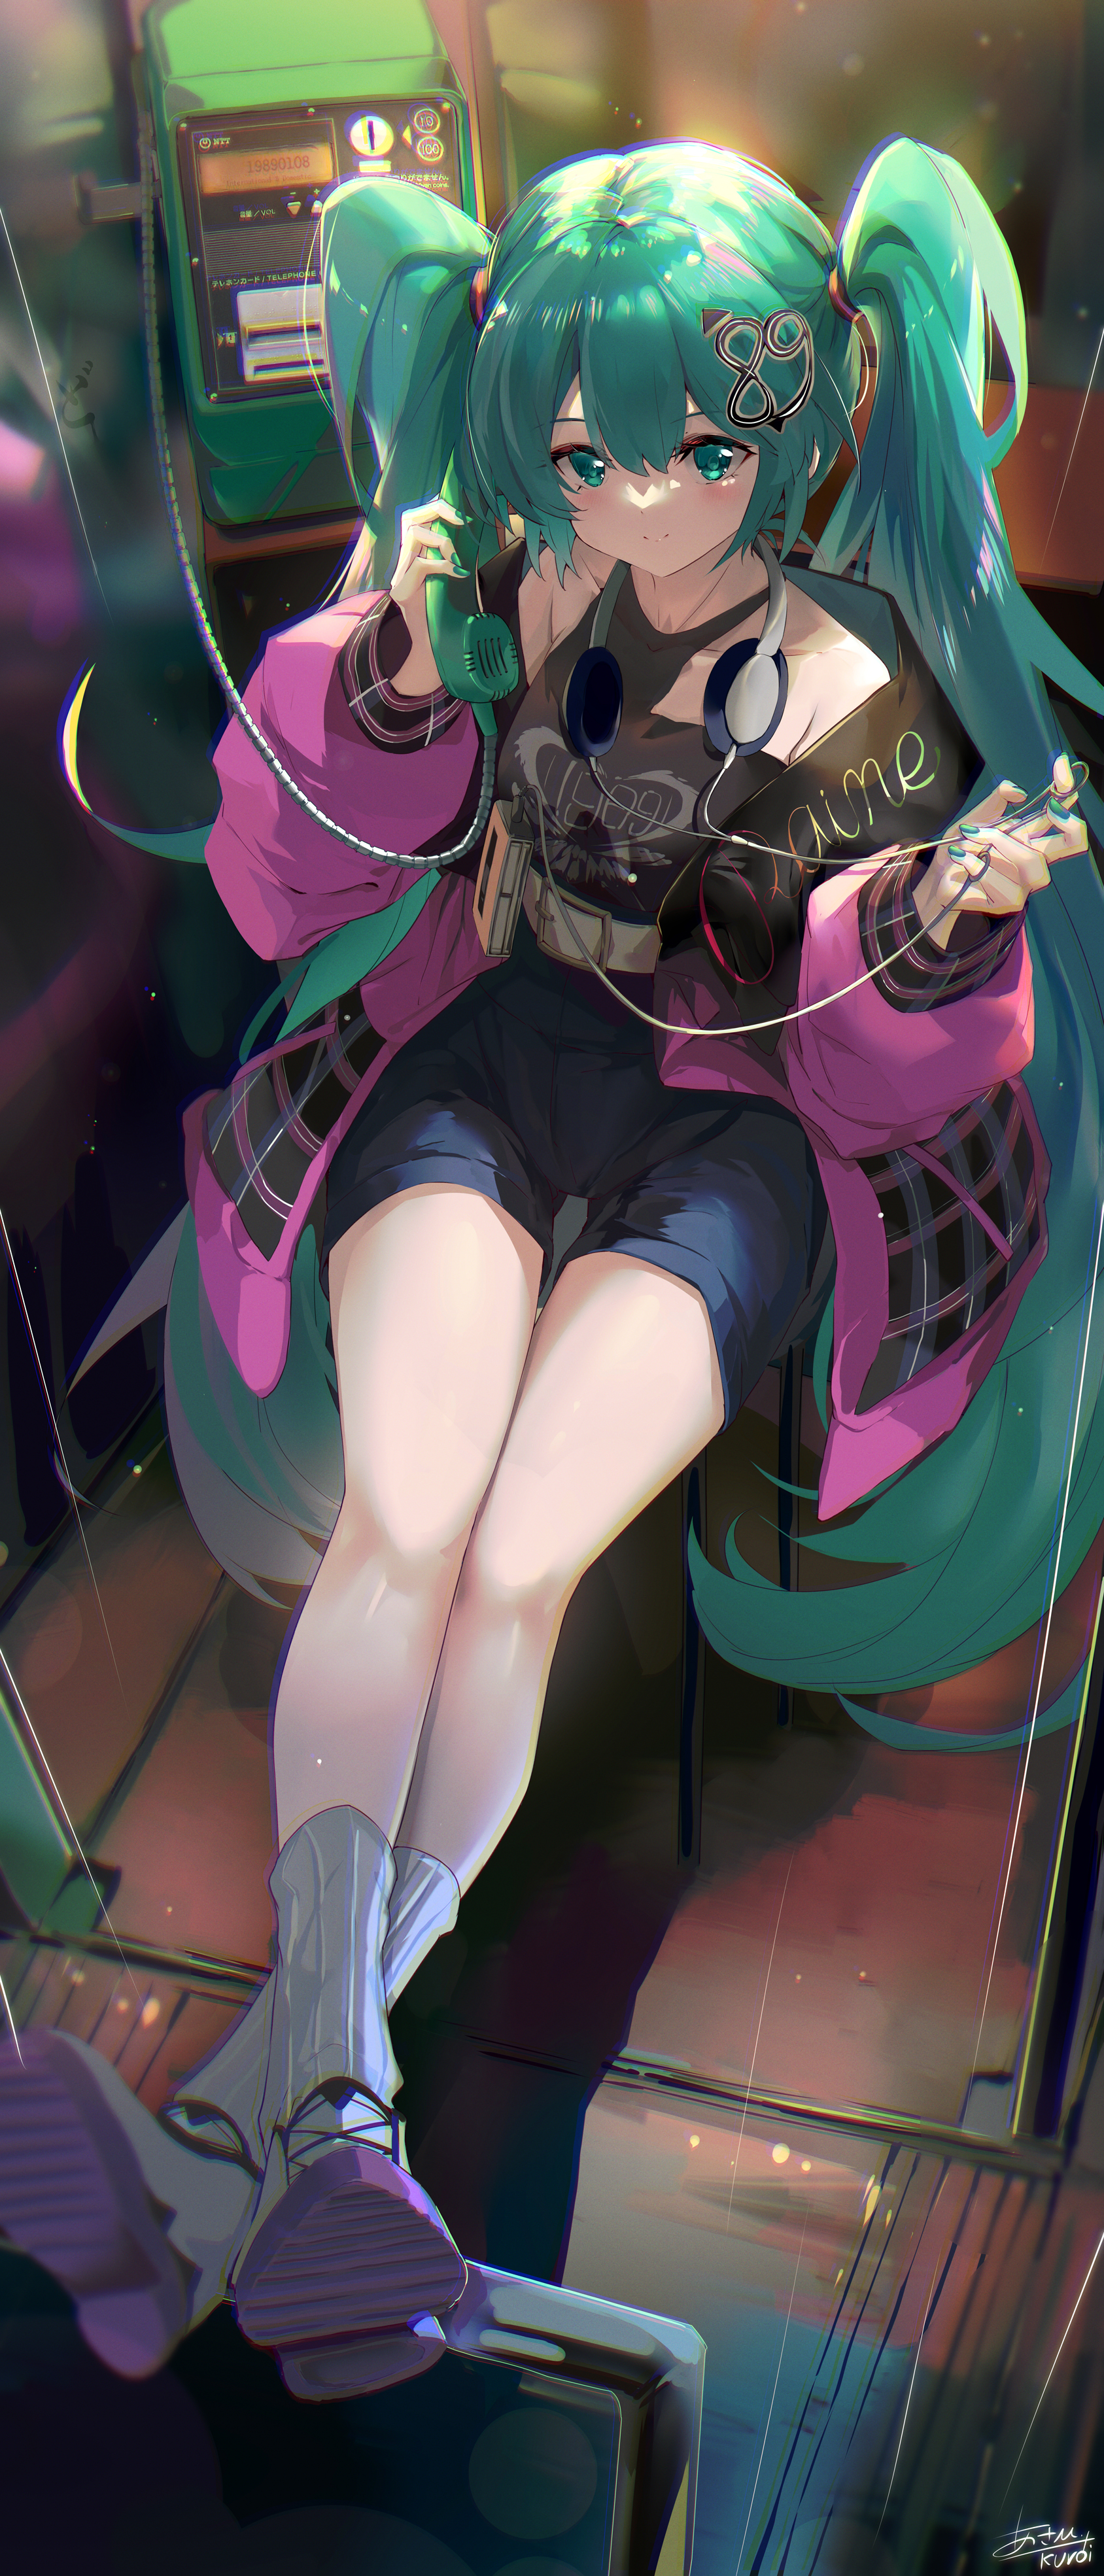 Anime 1688x3939 Vocaloid Hatsune Miku anime girls portrait display twintails sitting legs crossed legs phone looking at viewer smiling long hair headphones thighs